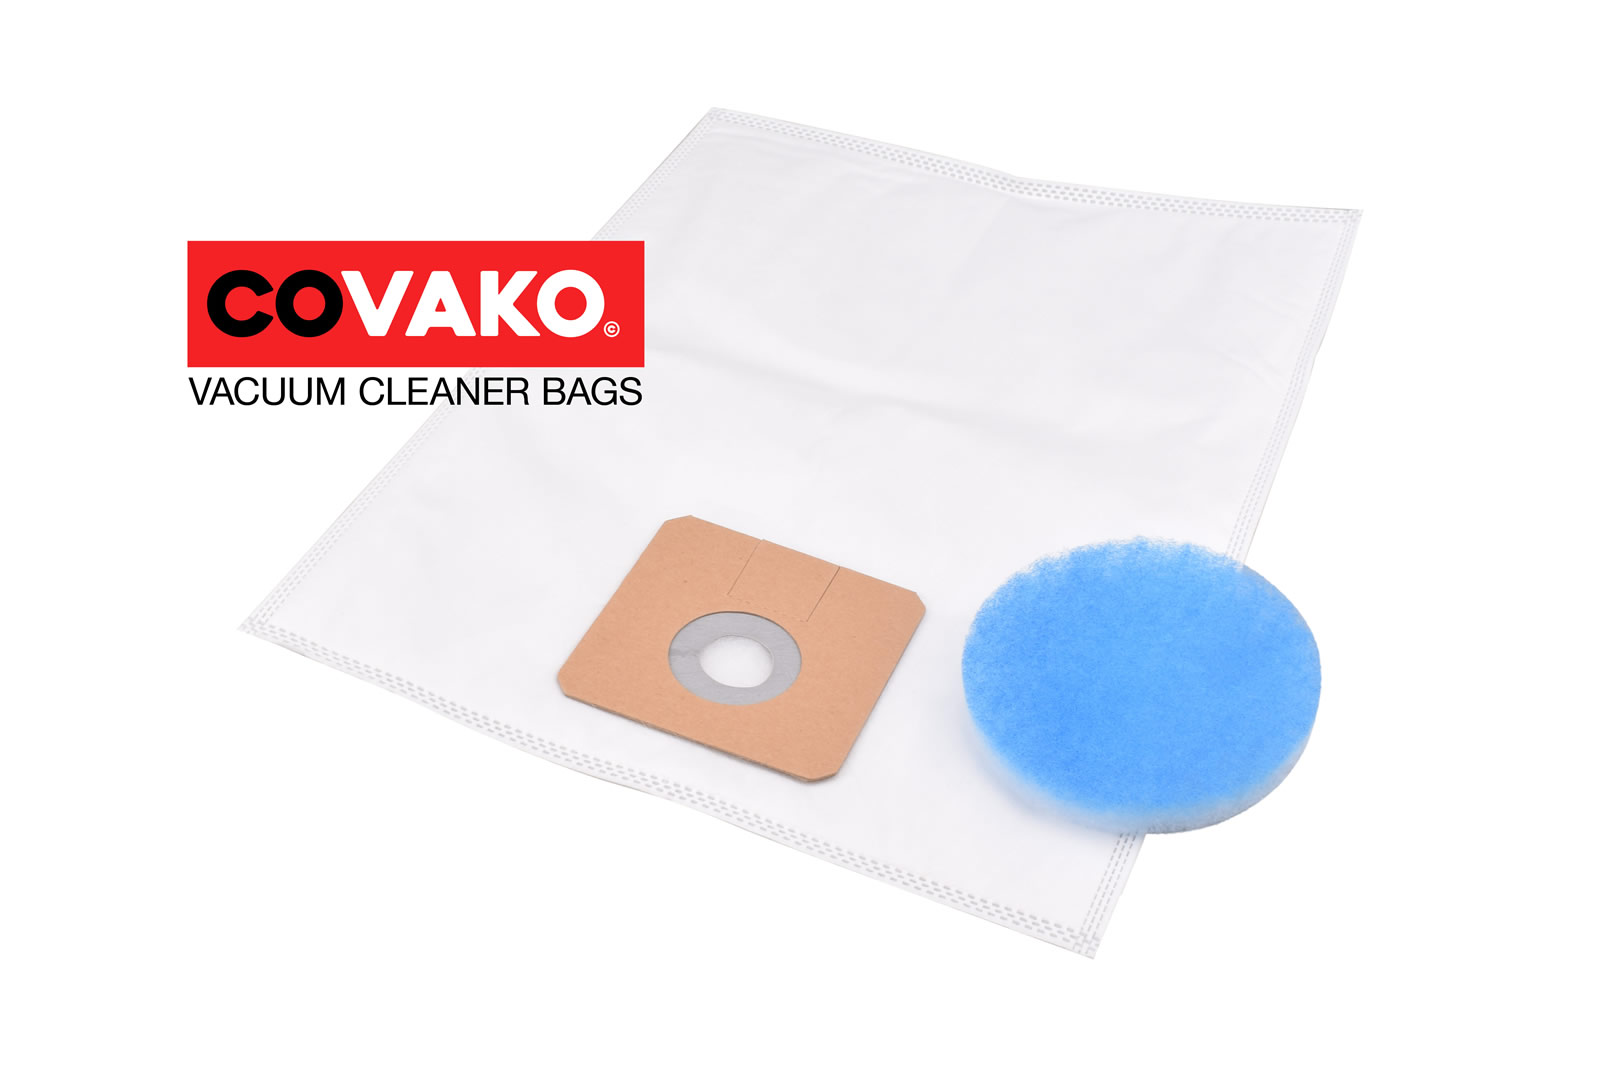 Ivac RS 09 / Synthesis - Ivac vacuum cleaner bags